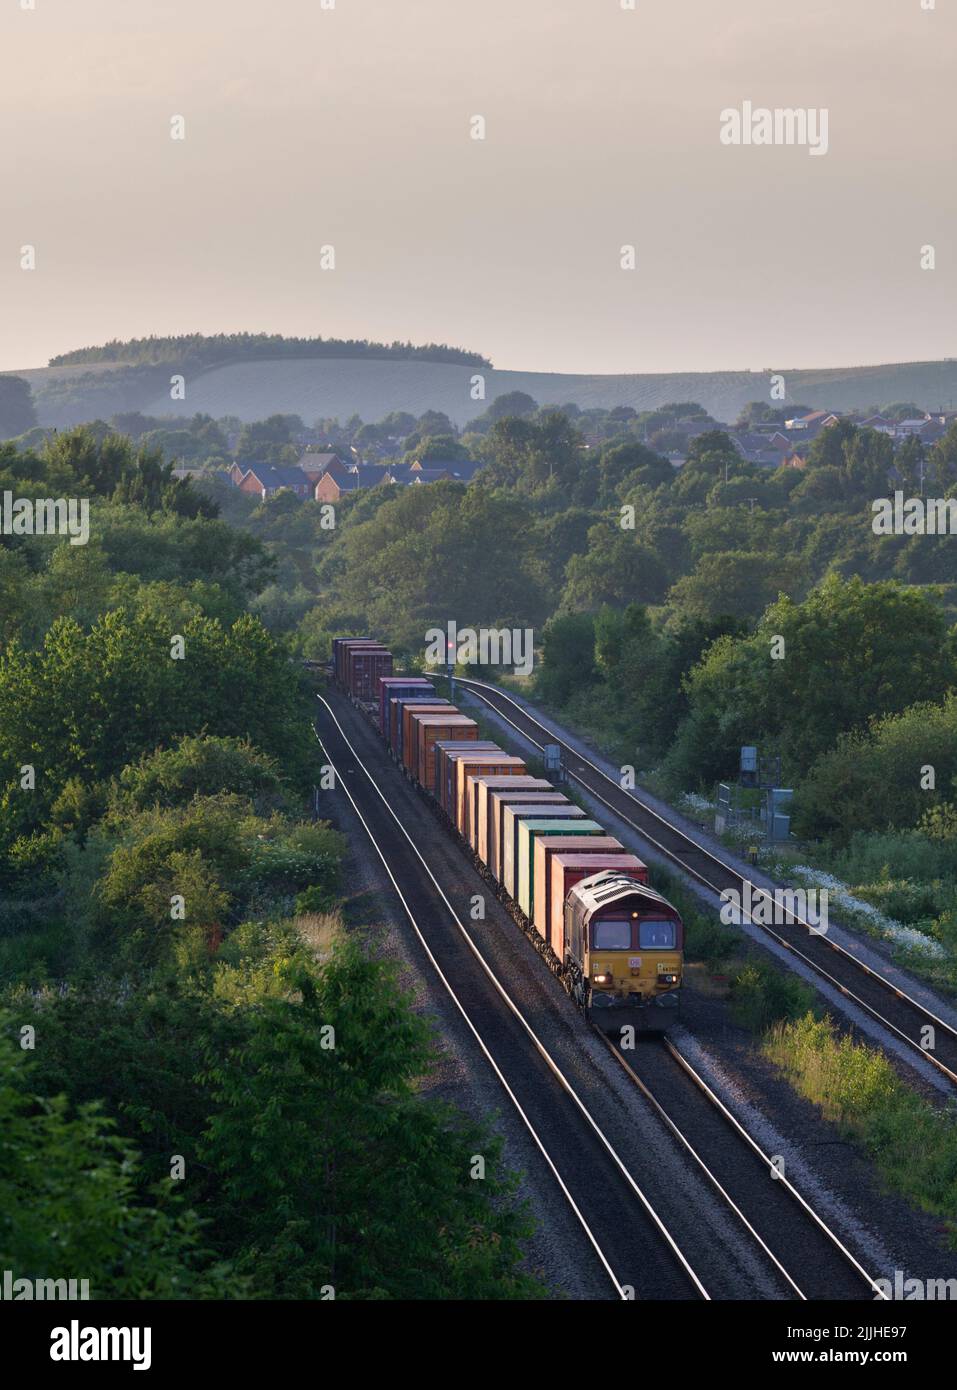 DB Cargo Rail UK class 66 diesel locomotive passing Bennerley in the Erewash valley, Nottinghamshire, UK with a freight train carrying containers Stock Photo